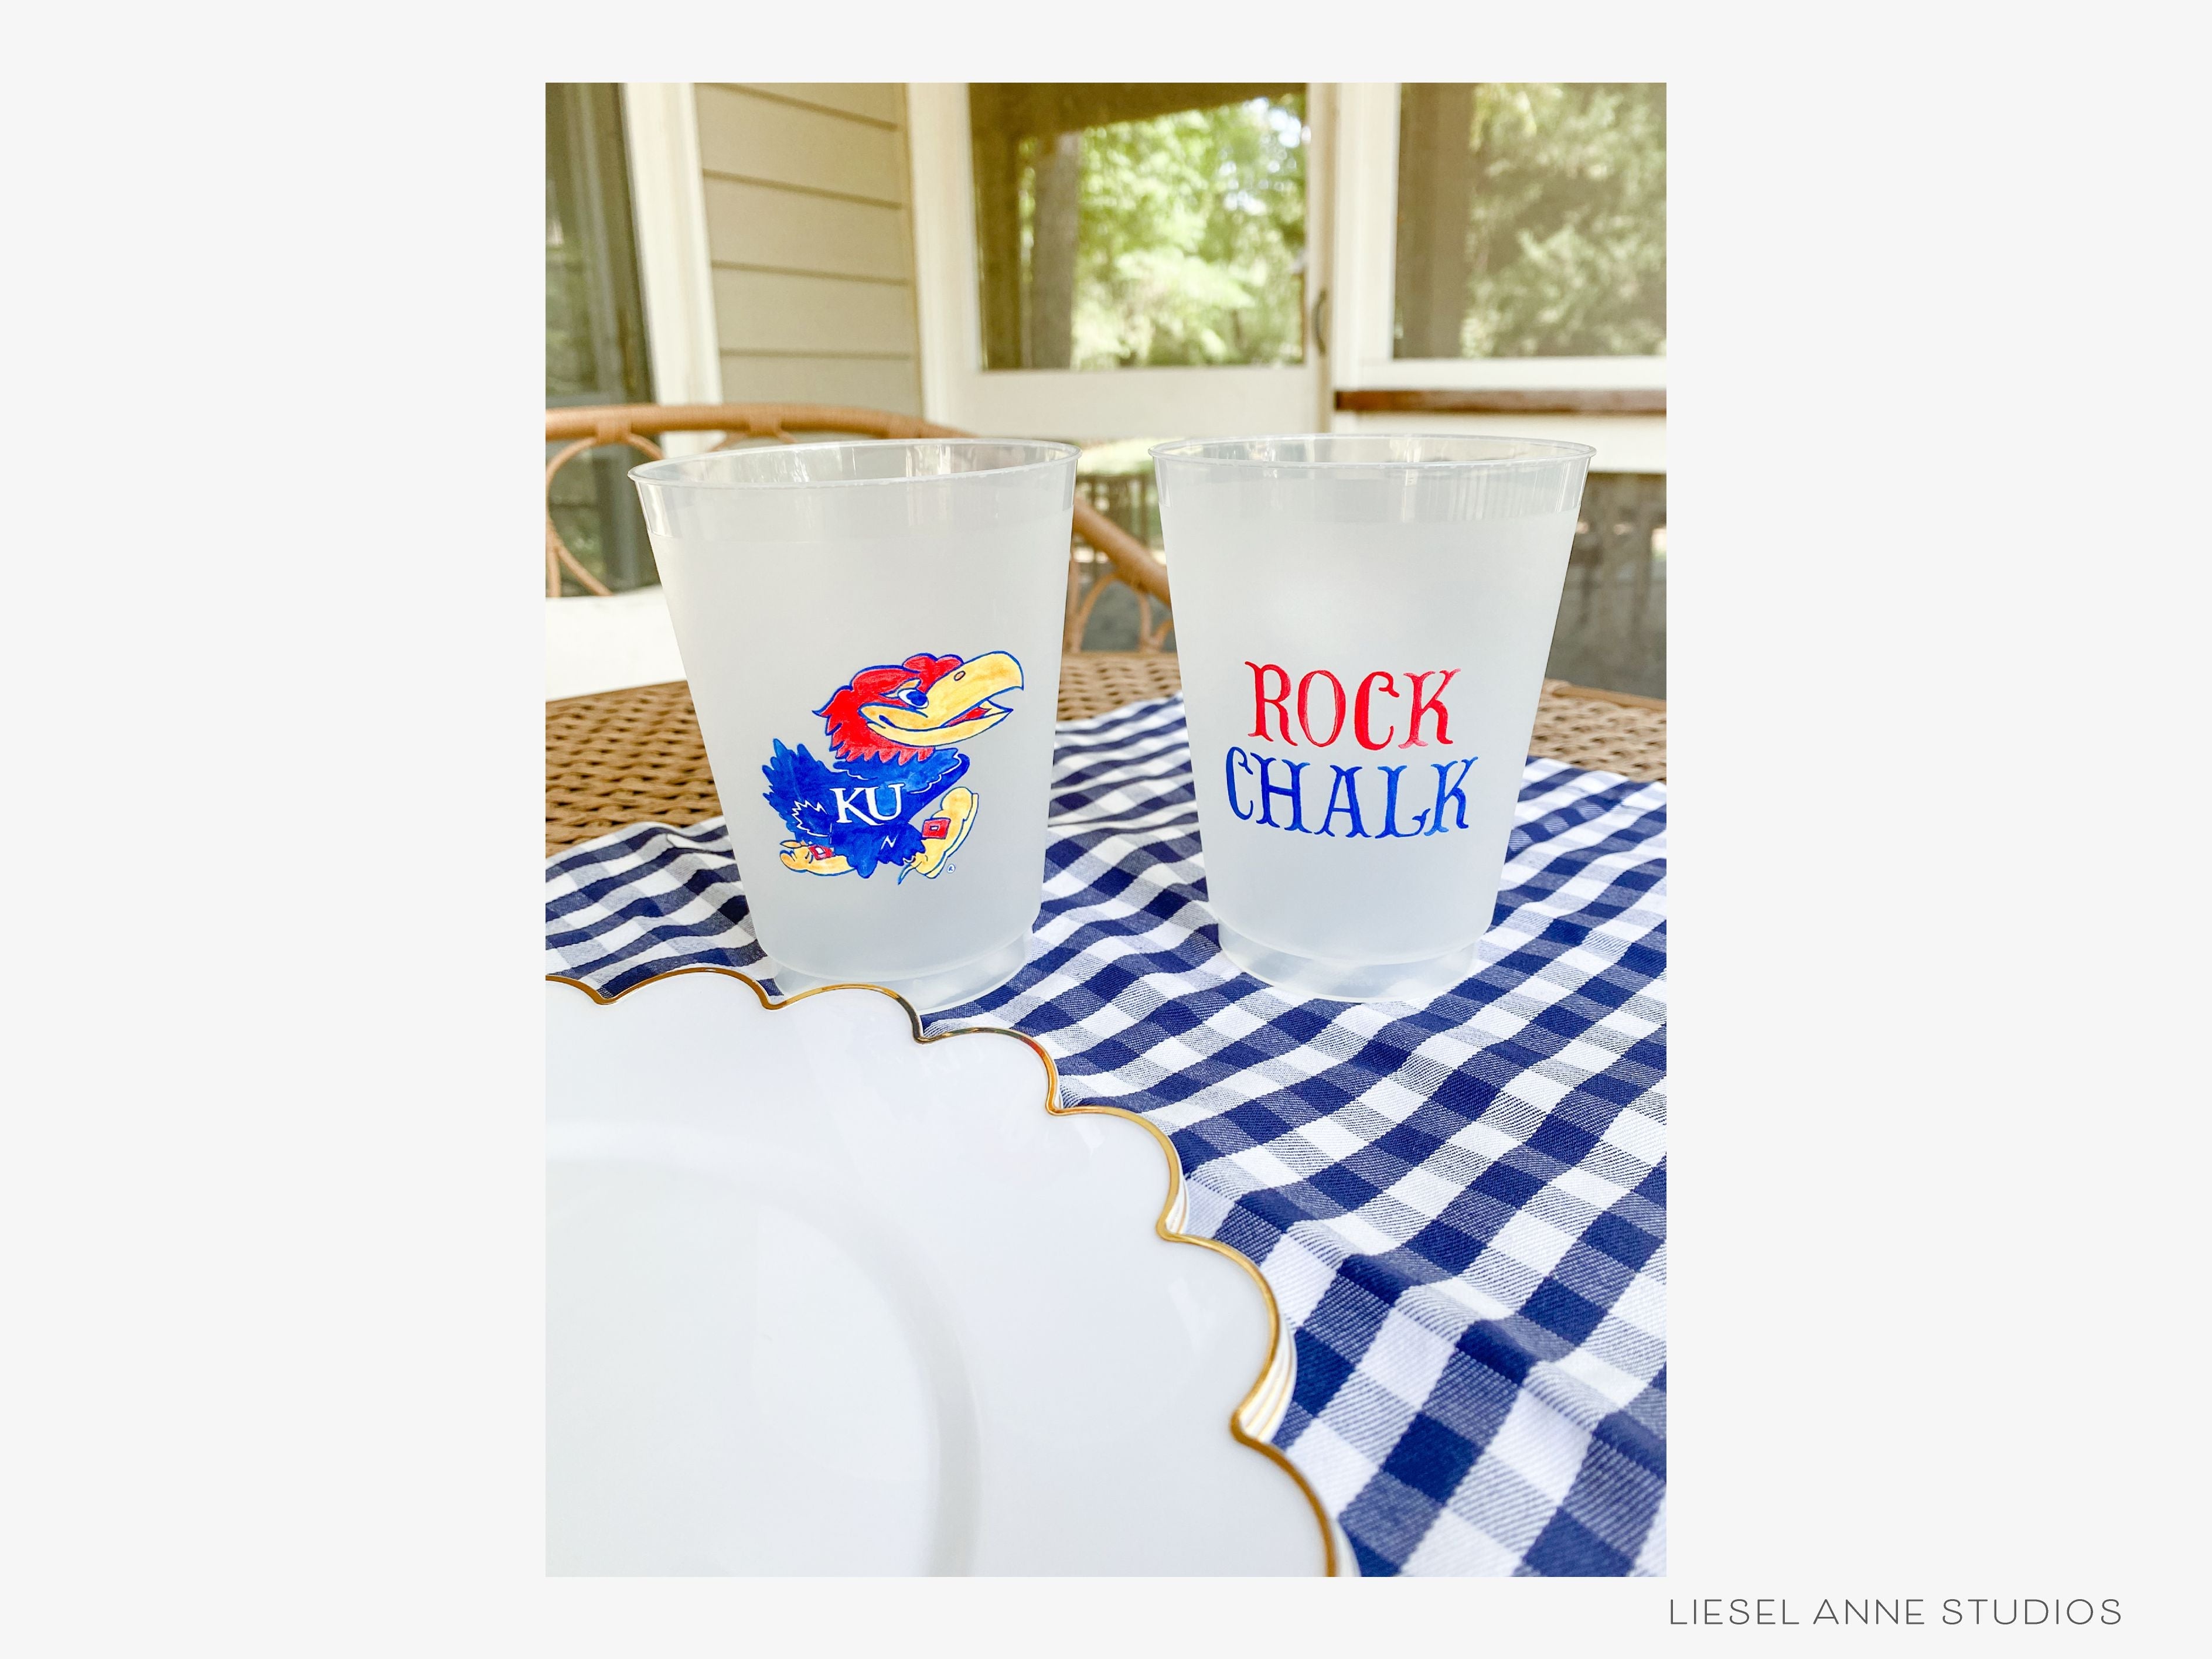 Jayhawk *Officially Licensed* 16oz Shatterproof Cups (Set of 8)-These officially licensed Kansas Jayhawk shatterproof cups feature our hand-painted Jayhawk and Rock Chalk text and make great party decorations for watch parties, graduation, game days and more! They come in sets of 8 and are re-usable for other parties to come or make wonderful party favors!-The Singing Little Bird